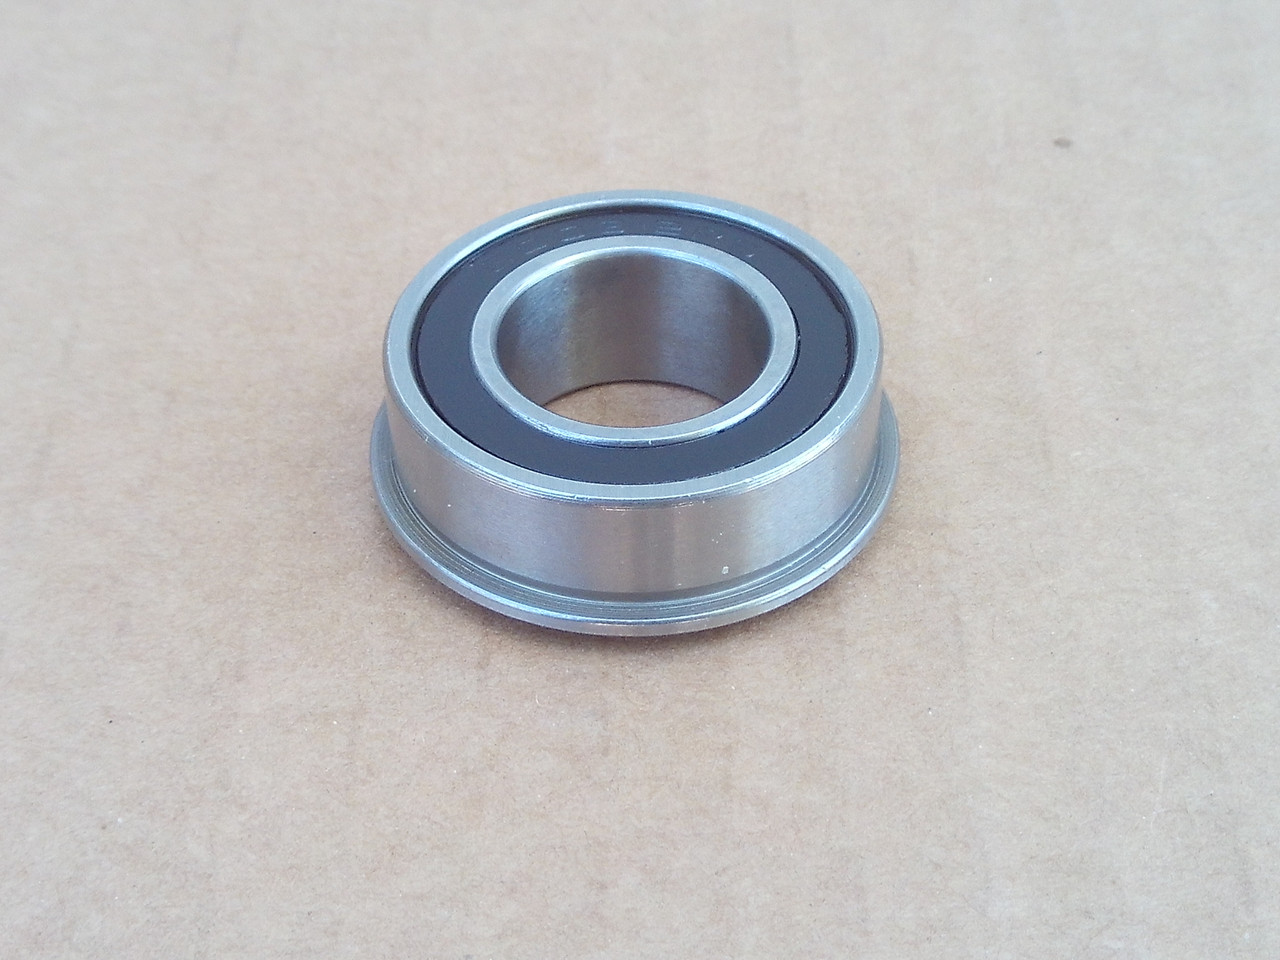 Drive Bearing for Snapper 7028722, 7028722YP, 10953, 12390, 15474, 26693, 1-0953, 1-2390, 1-5474, 2-6693